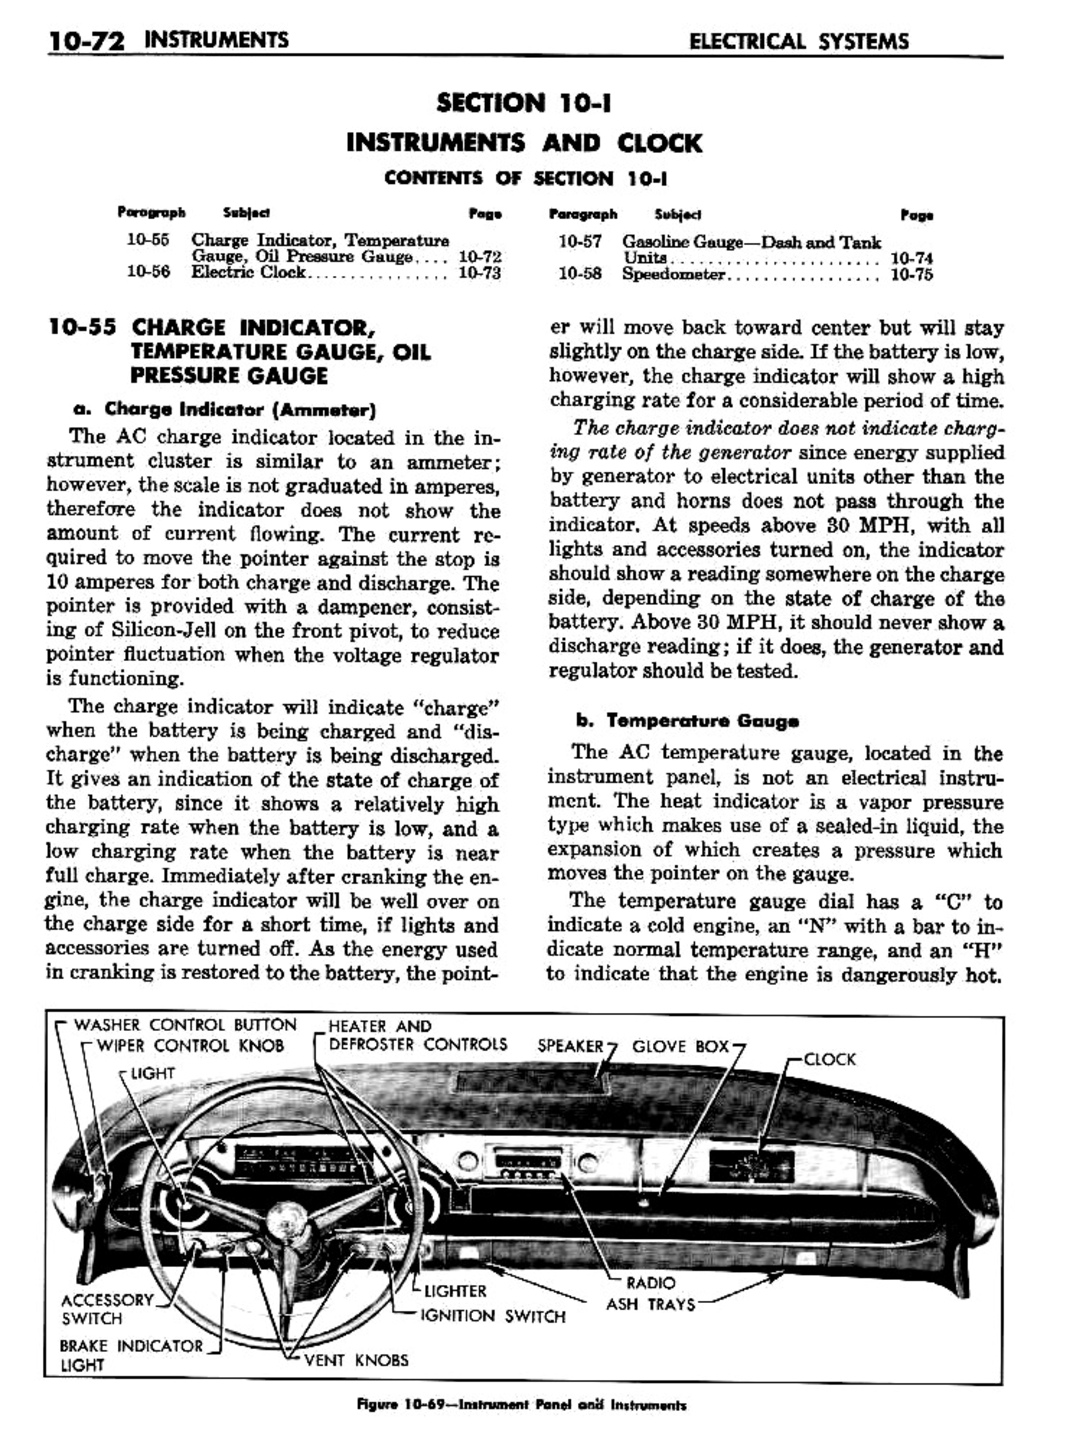 n_11 1957 Buick Shop Manual - Electrical Systems-072-072.jpg